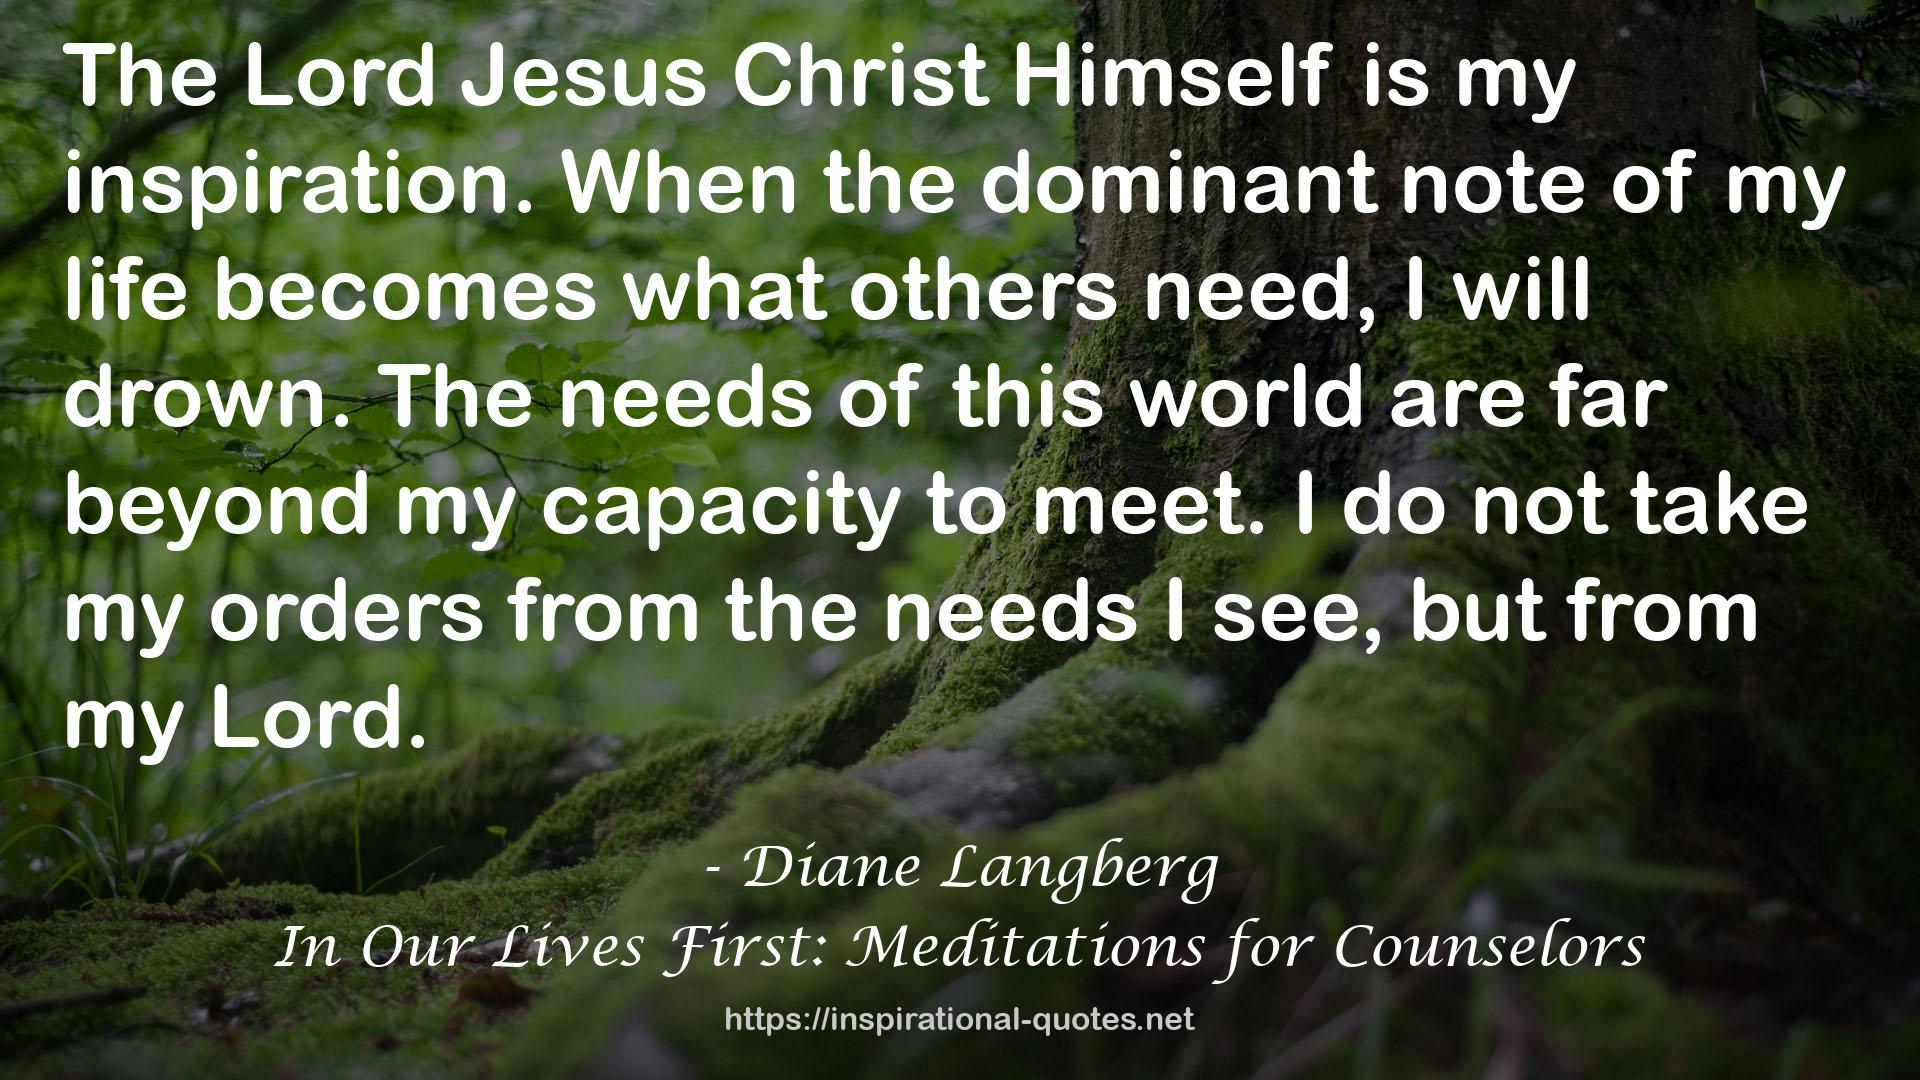 In Our Lives First: Meditations for Counselors QUOTES